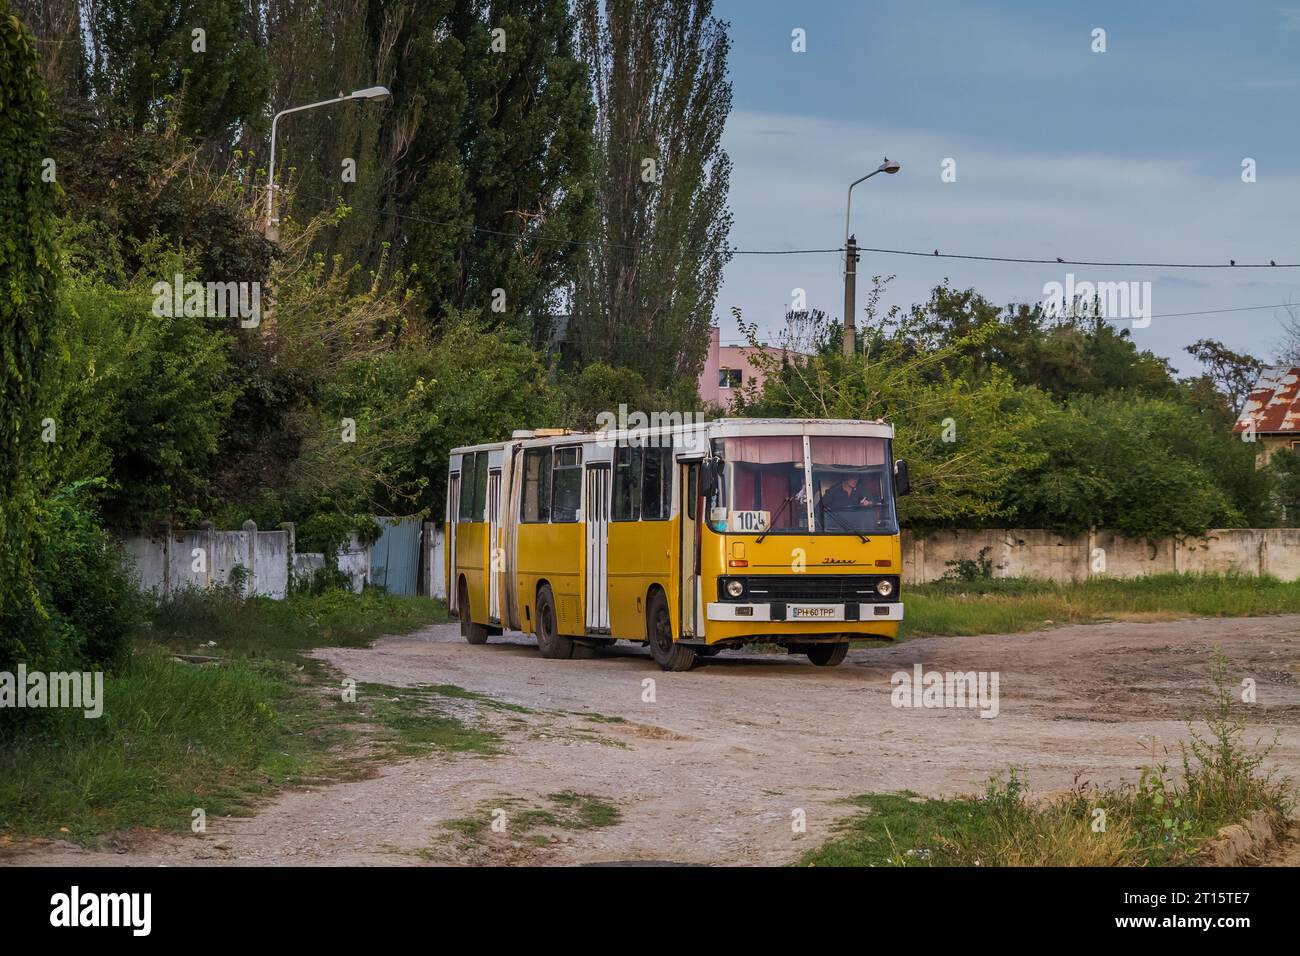 27.09.2017. Romania, Ploiesti, bus 104 terminus. One of many accordion doors Ikarus in Ploiesti that time wating for his departure to the town centre. Stock Photo